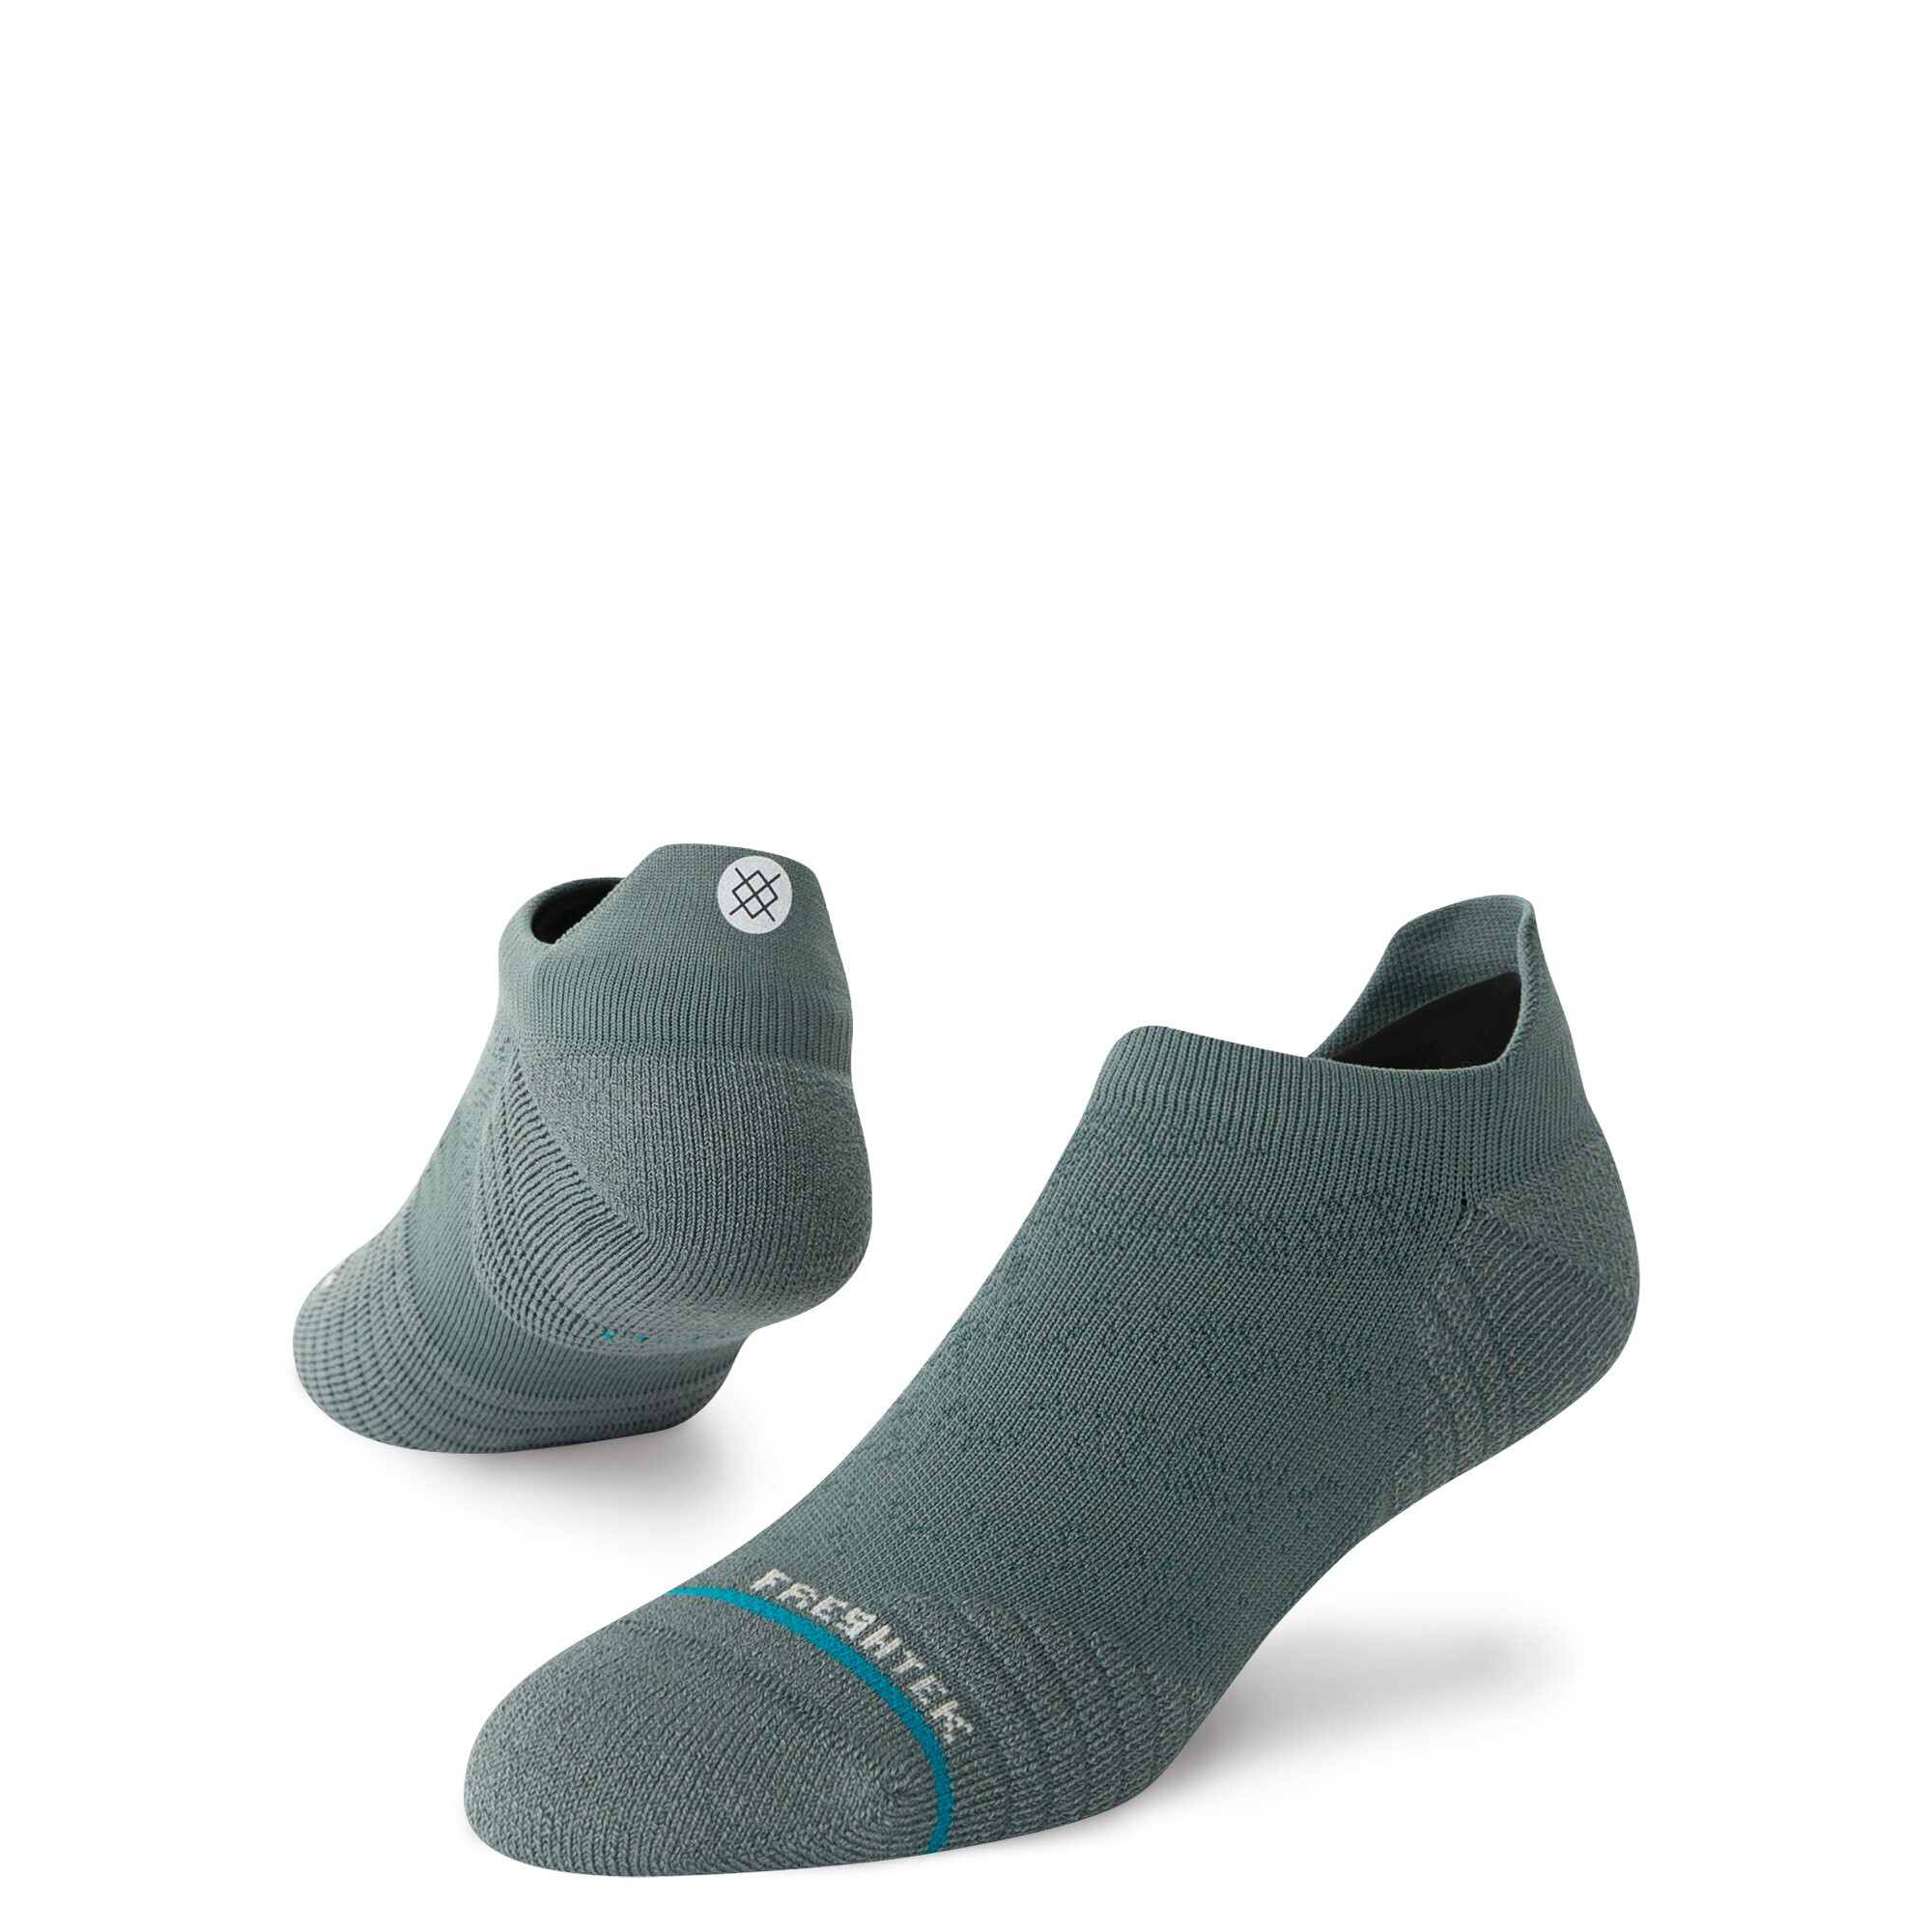 Imbracaminte Femei Stance Athletic Tab Teal